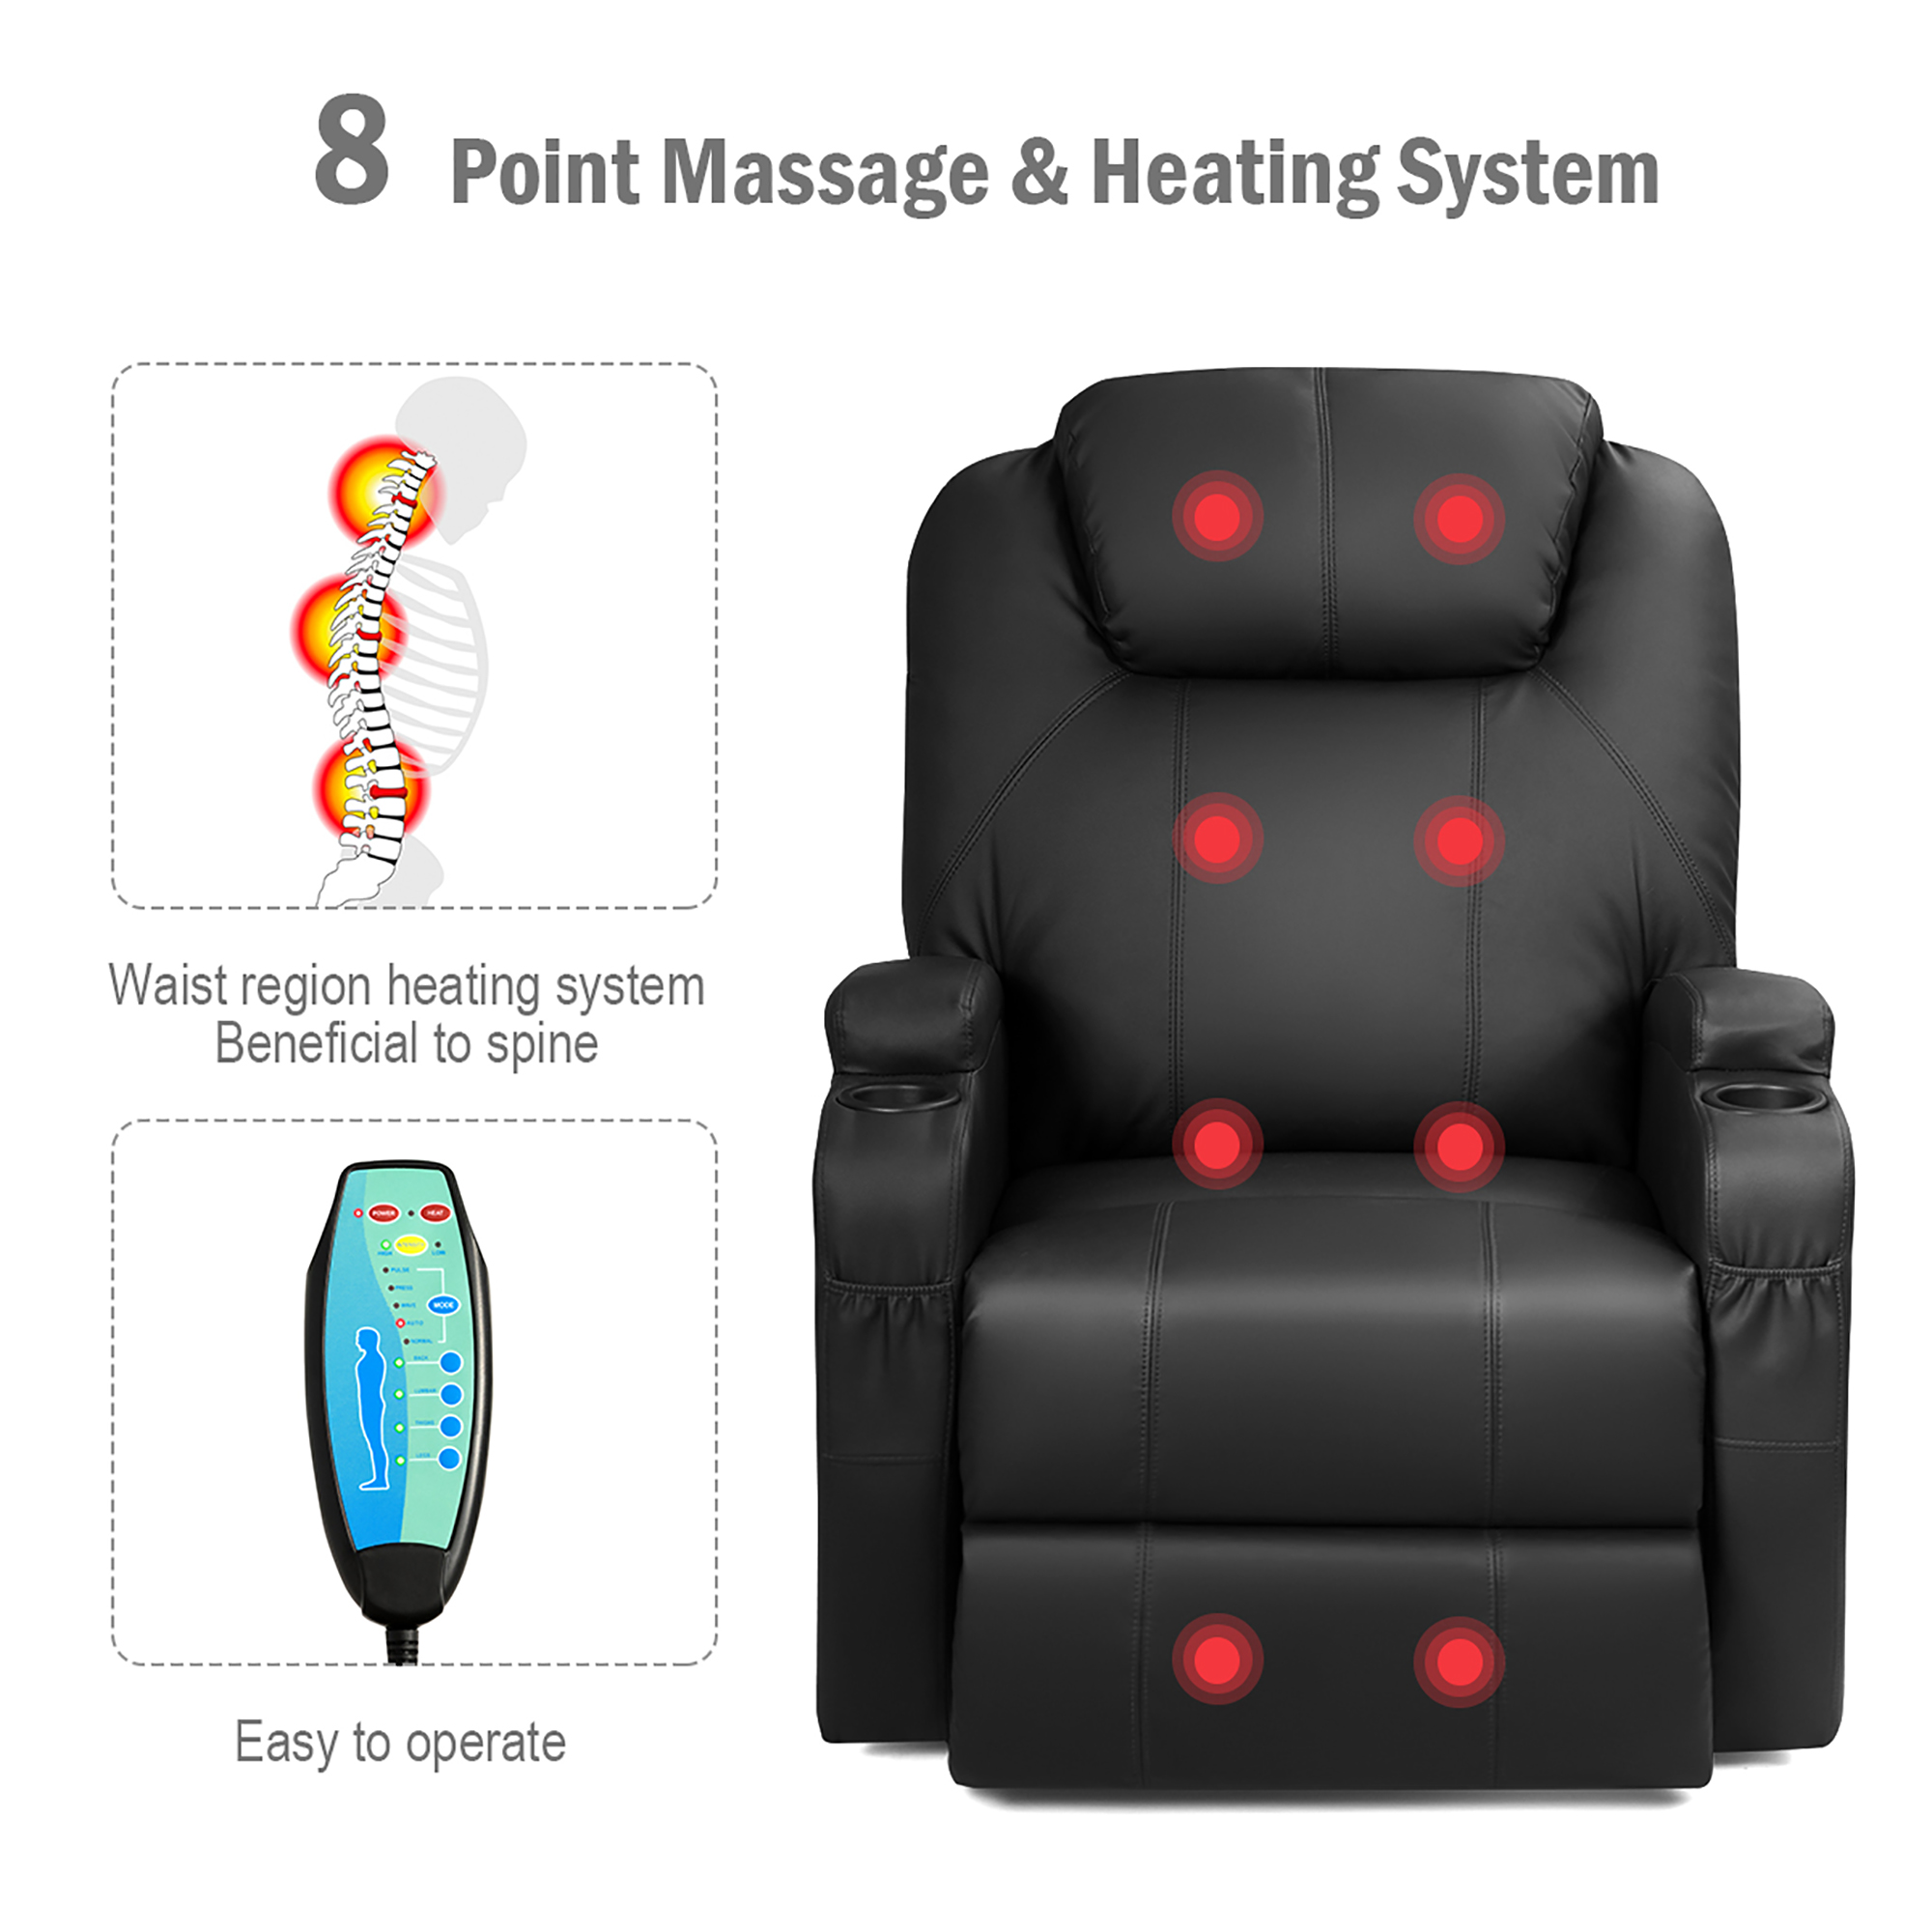 Costway Electric Lift Power Recliner Chair Heated Massage Sofa Lounge W Remote Control